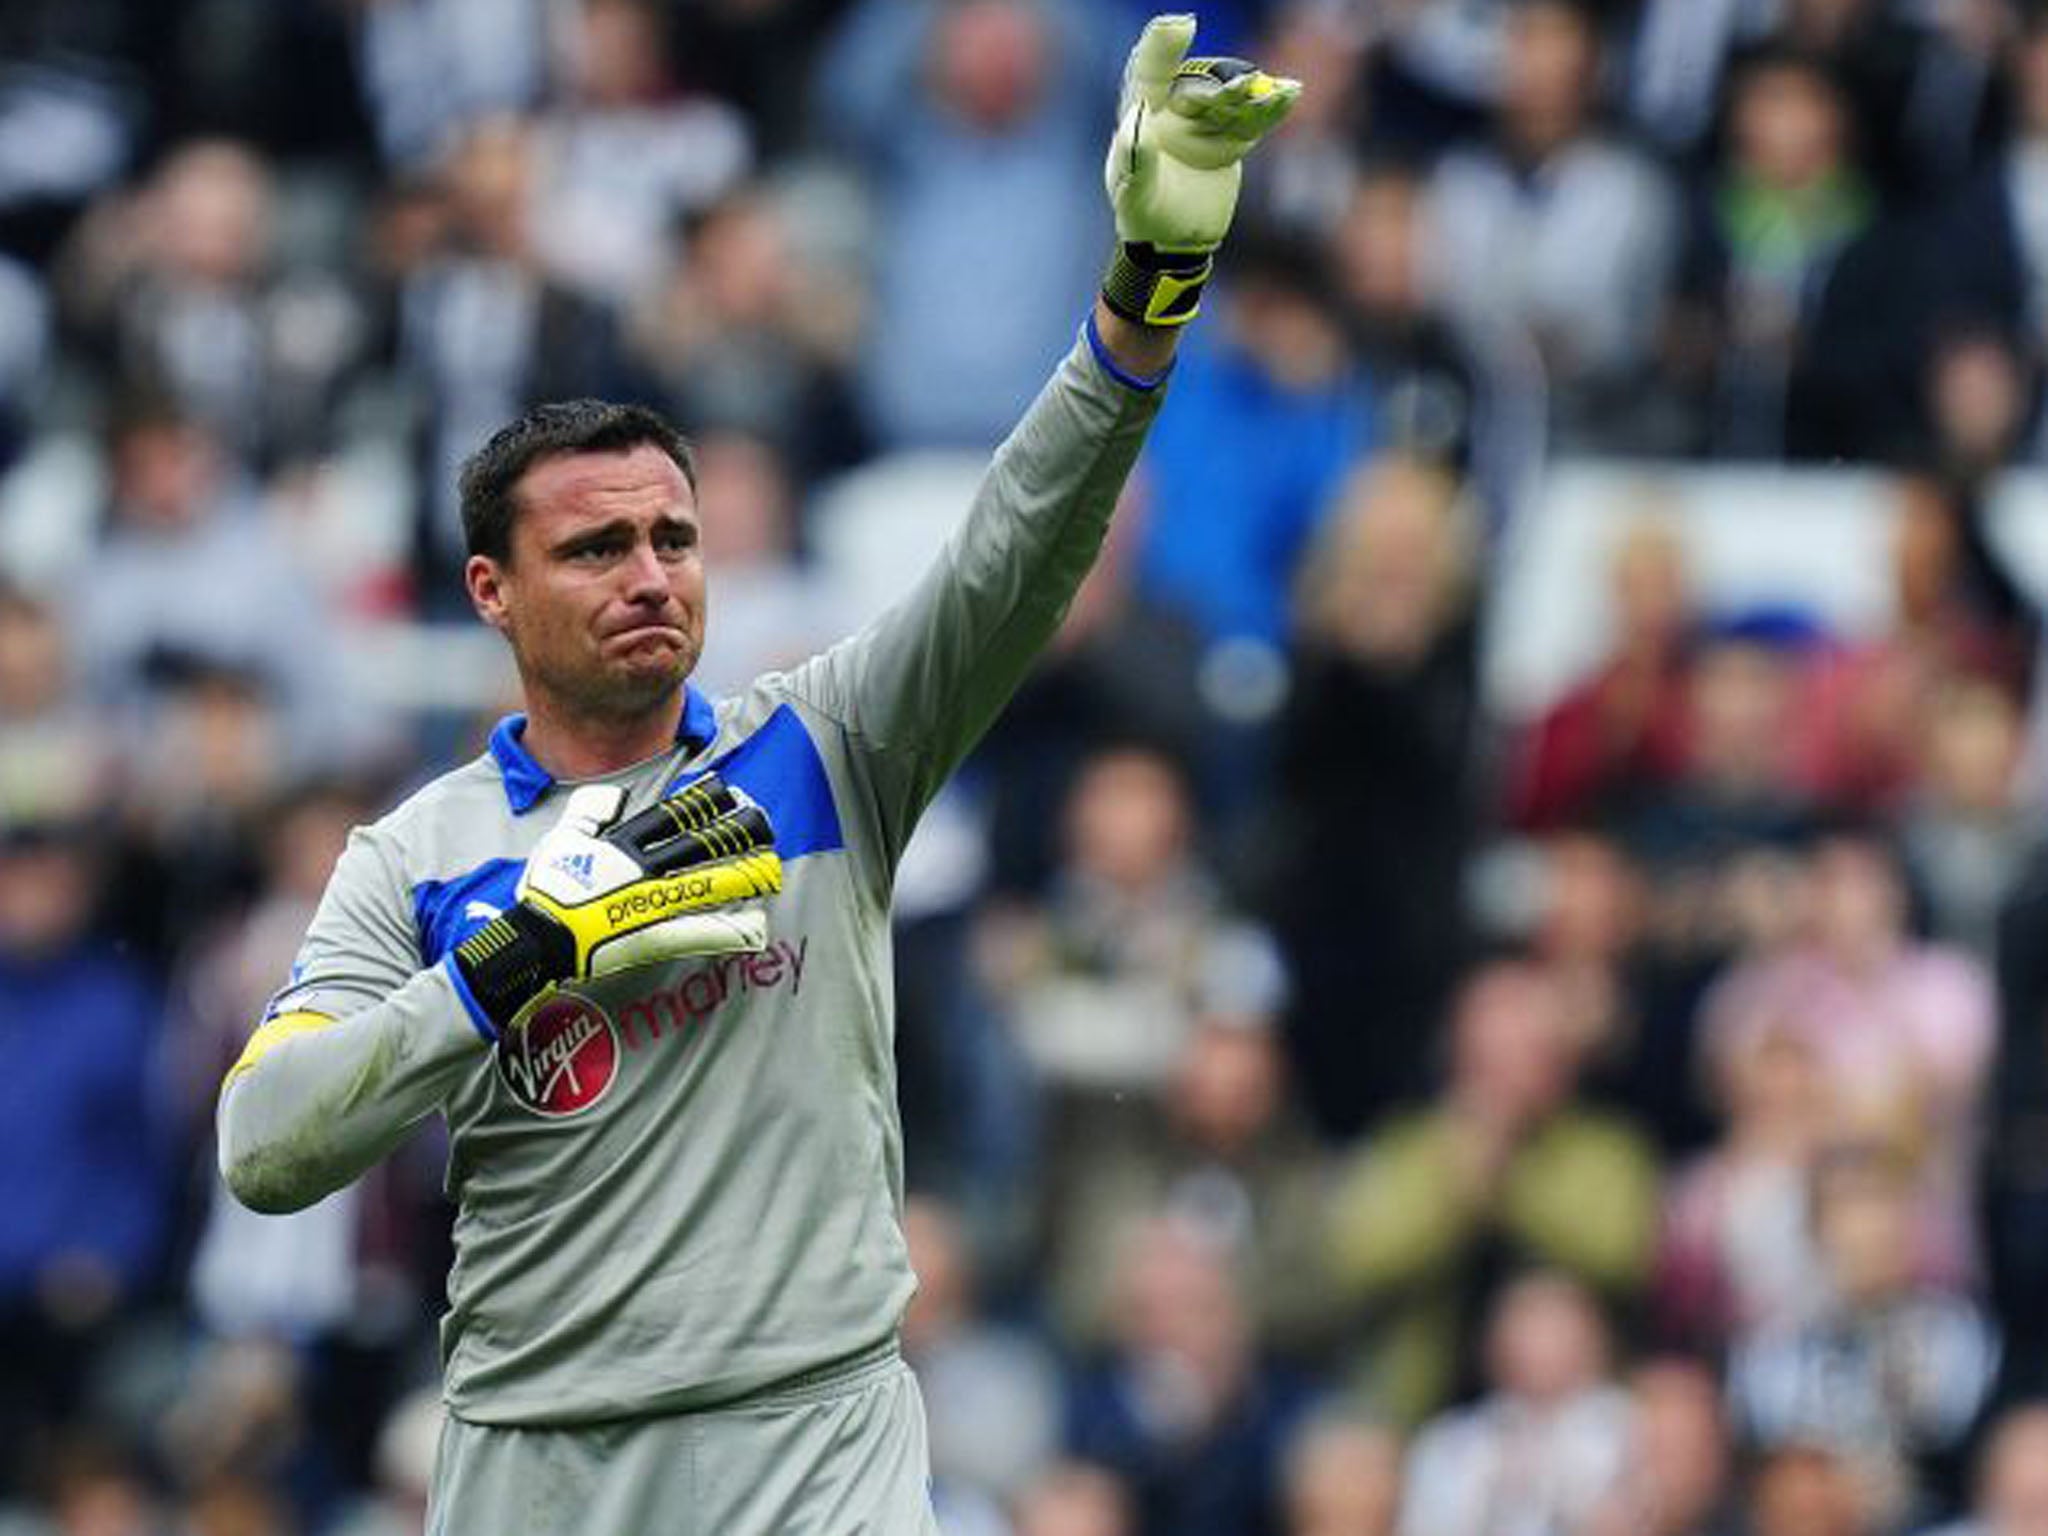 Steve Harper, the Newcastle goalkeeper, bid an emotional farewell to the fans at St James' Park in his final game (Stu Forster/Getty Images)